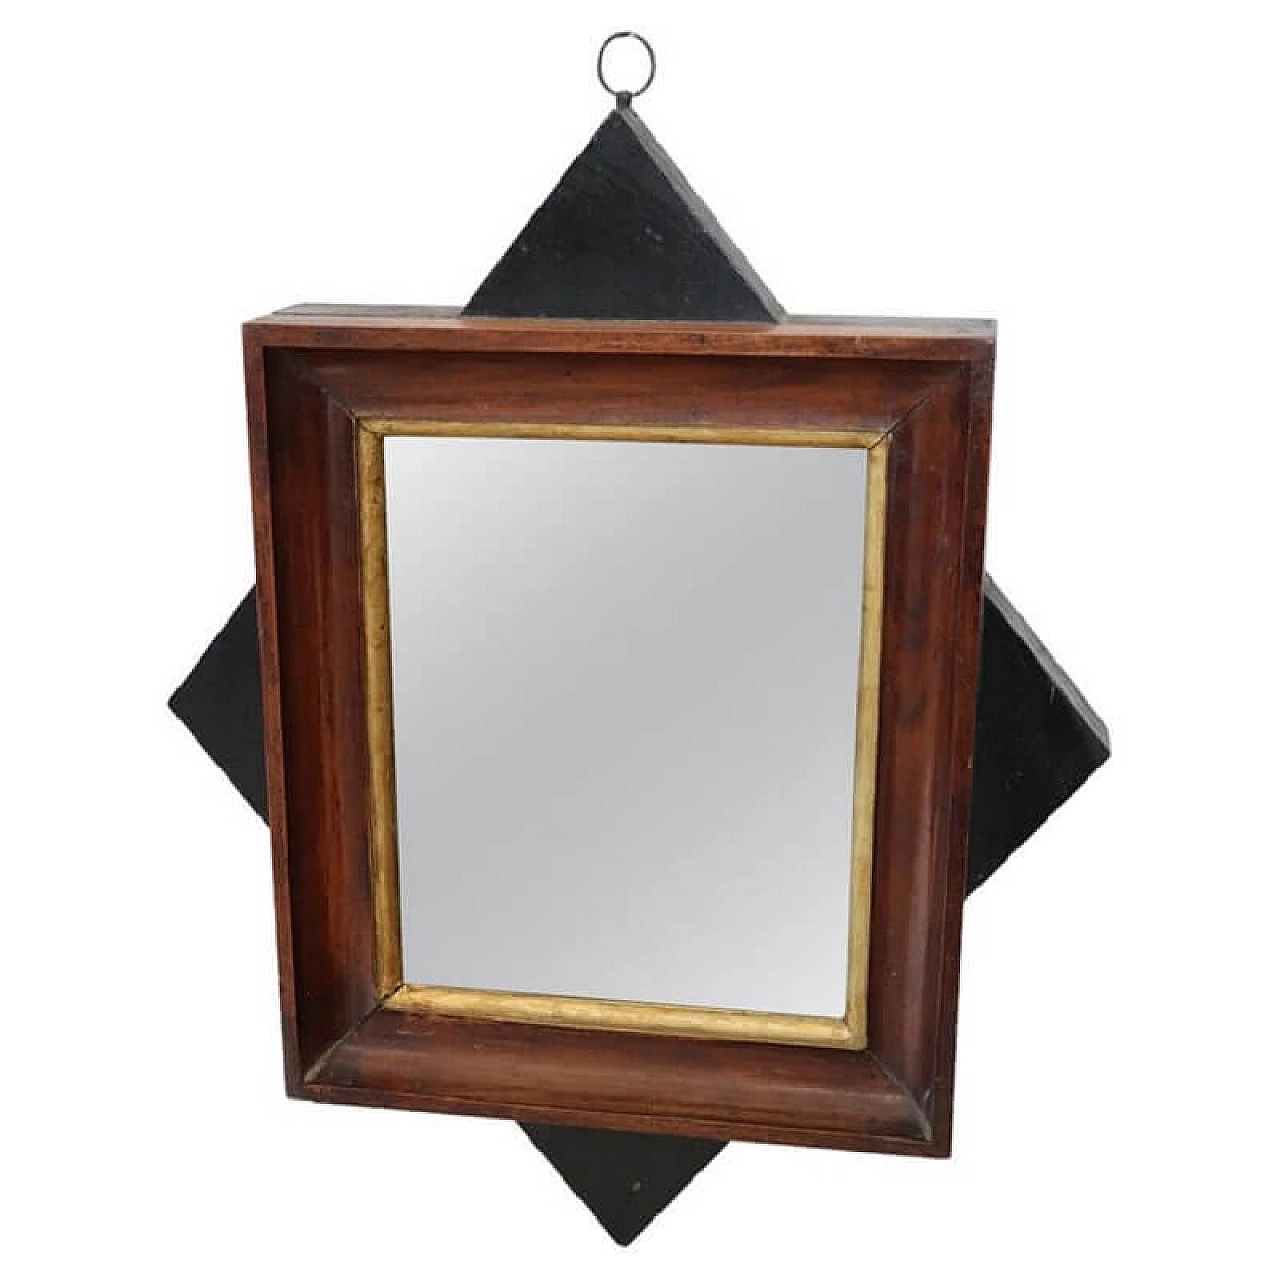 Walnut mirror with star-shaped frame, early 19th century 1